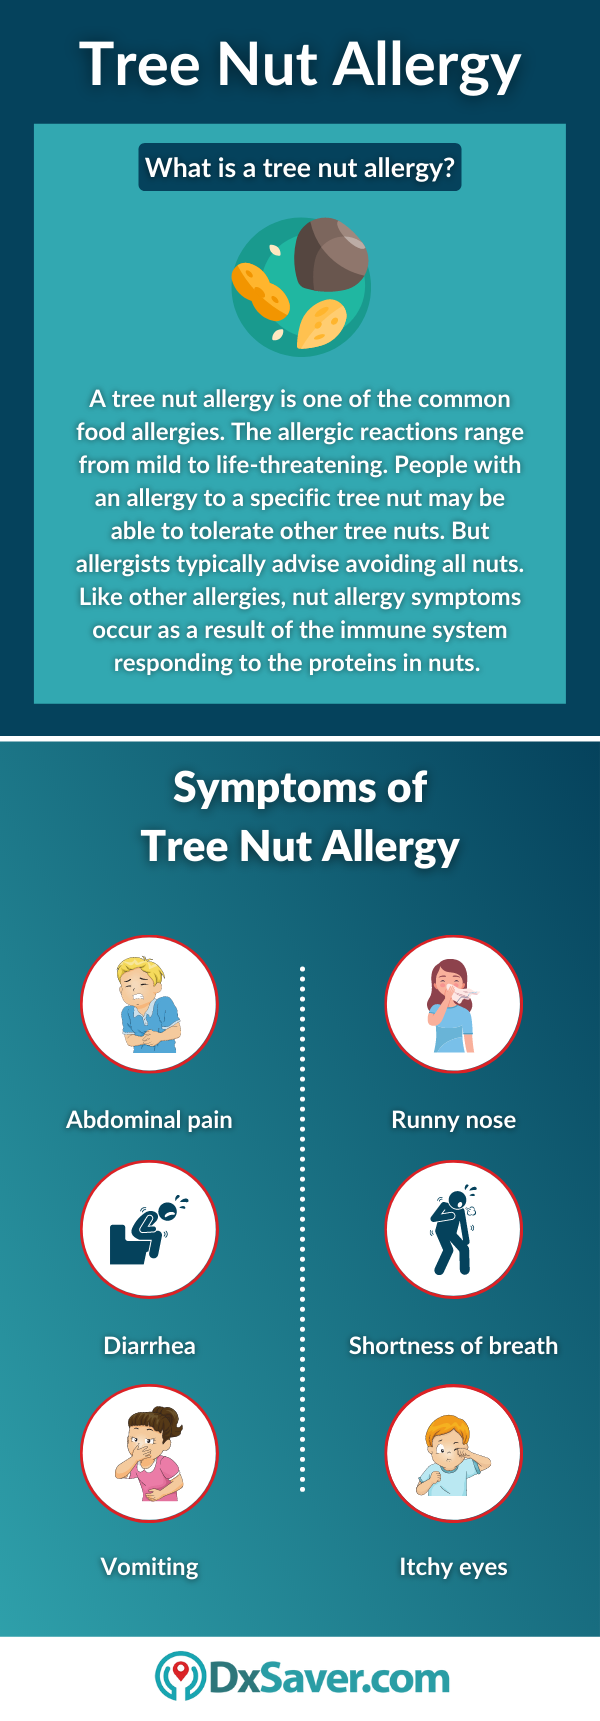 Tree Nut Allergy and its Symptoms